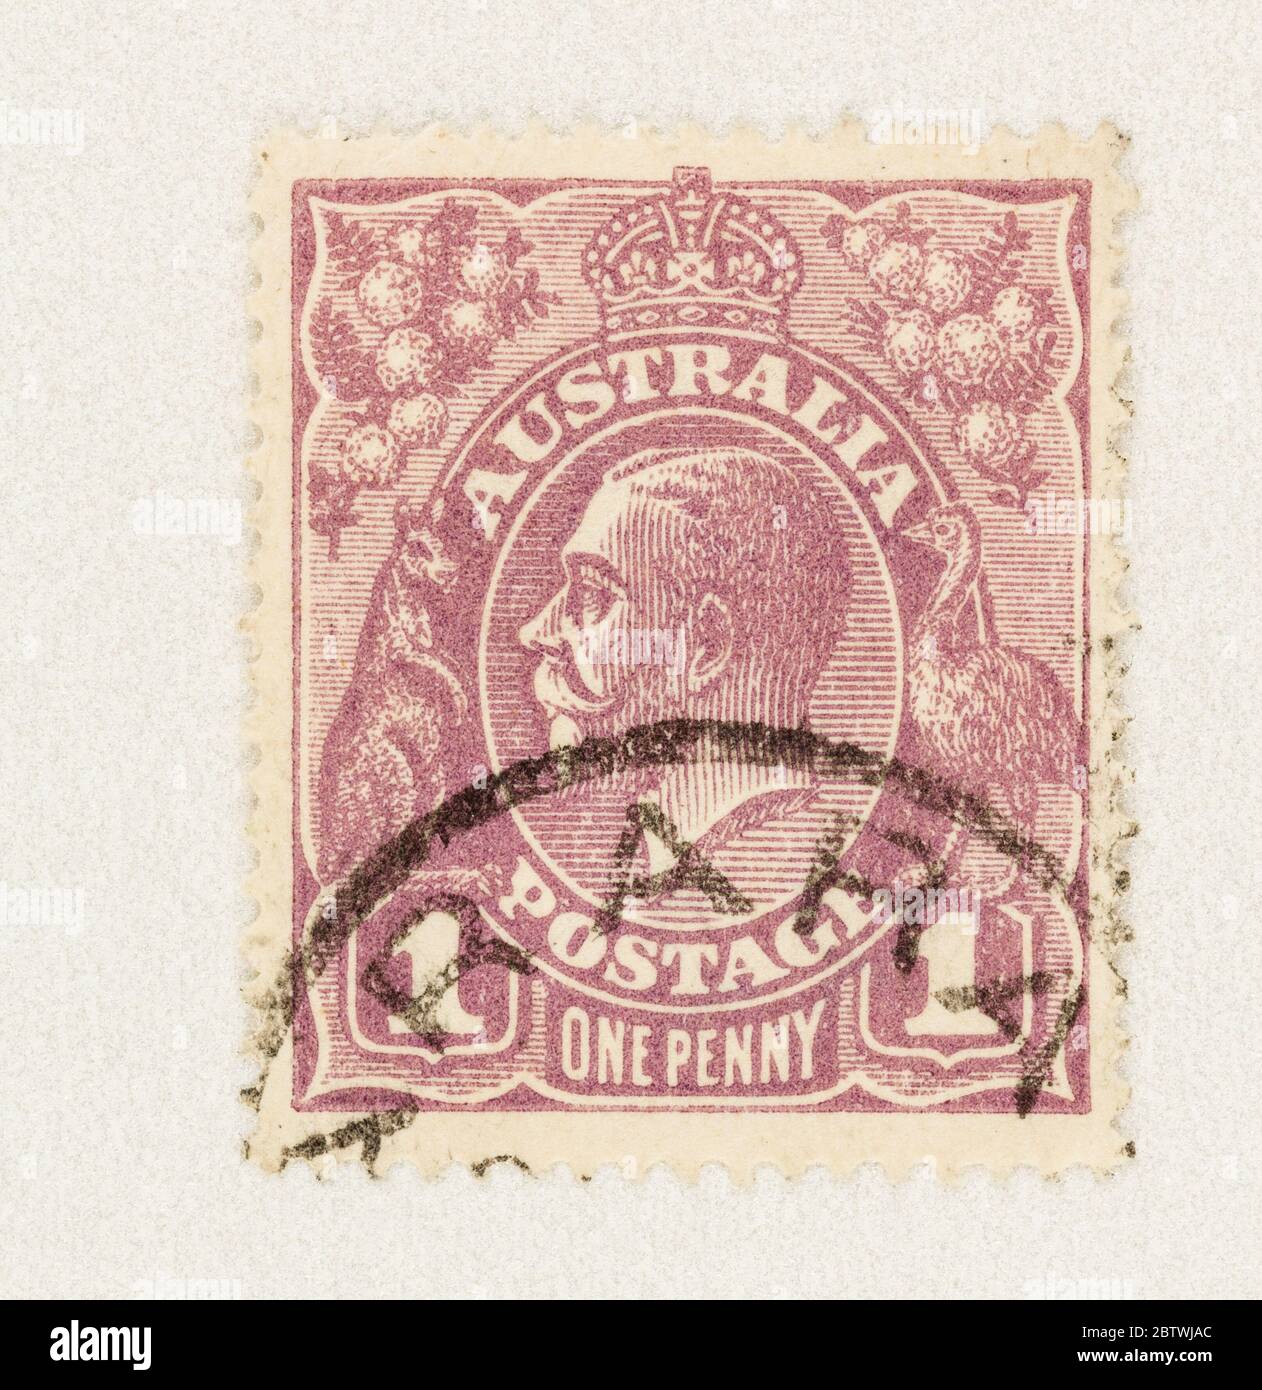 SEATTLE WASHINGTON - May 27, 2020:  King George V with emu and kangaroo in dull red on 1 penny Australian stamp. Stock Photo